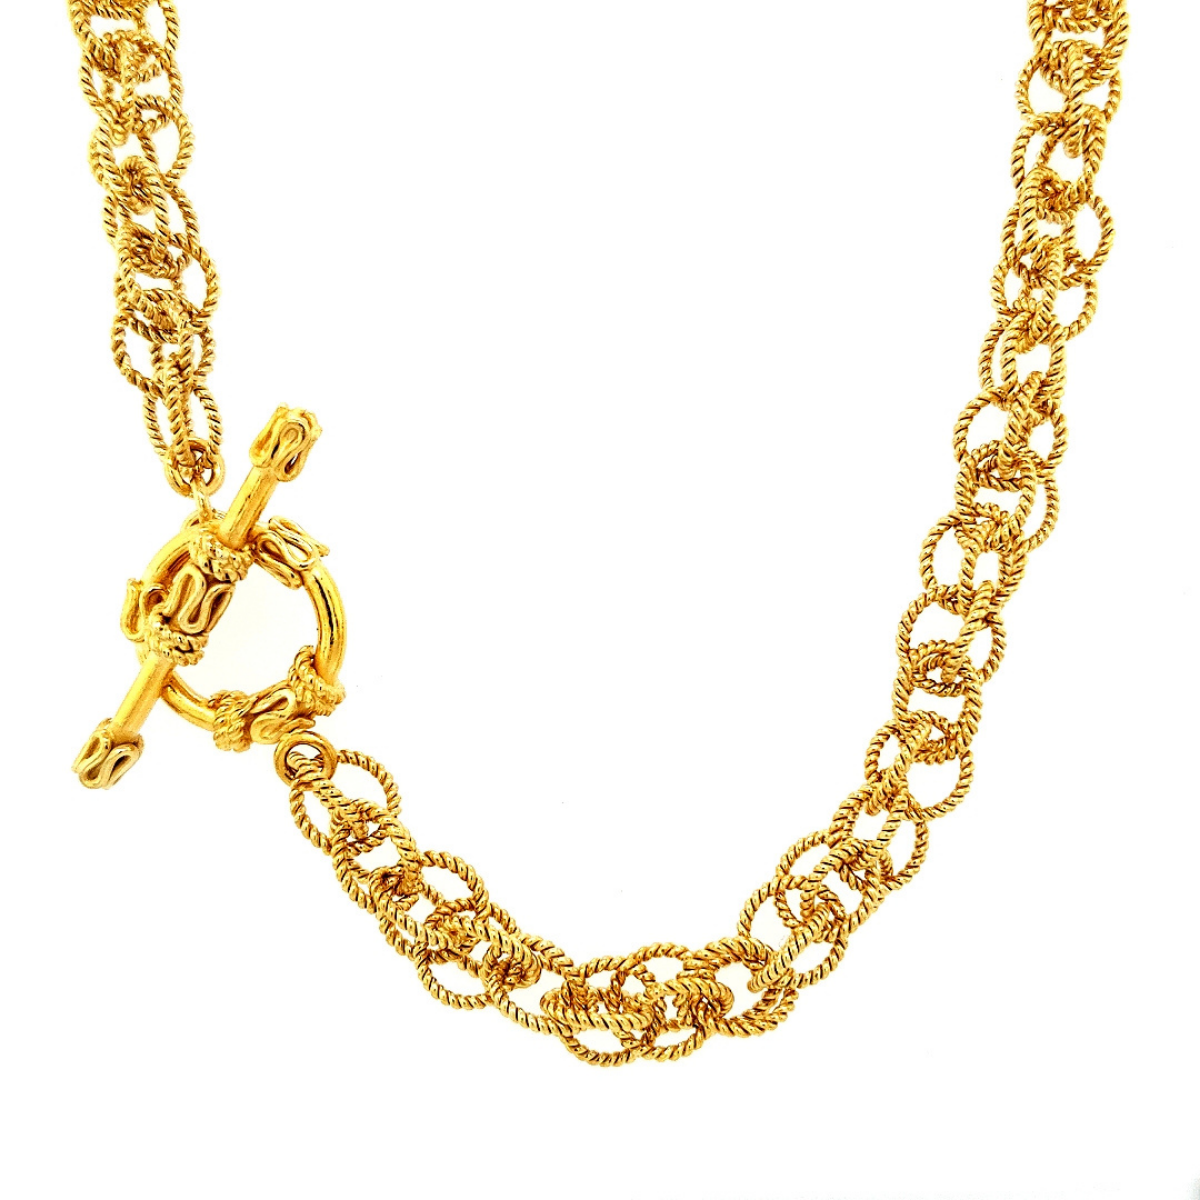 24K Gold Vermeil 8mm Spinner Necklace - Closeup of Decorative Toggle Clasp on white background